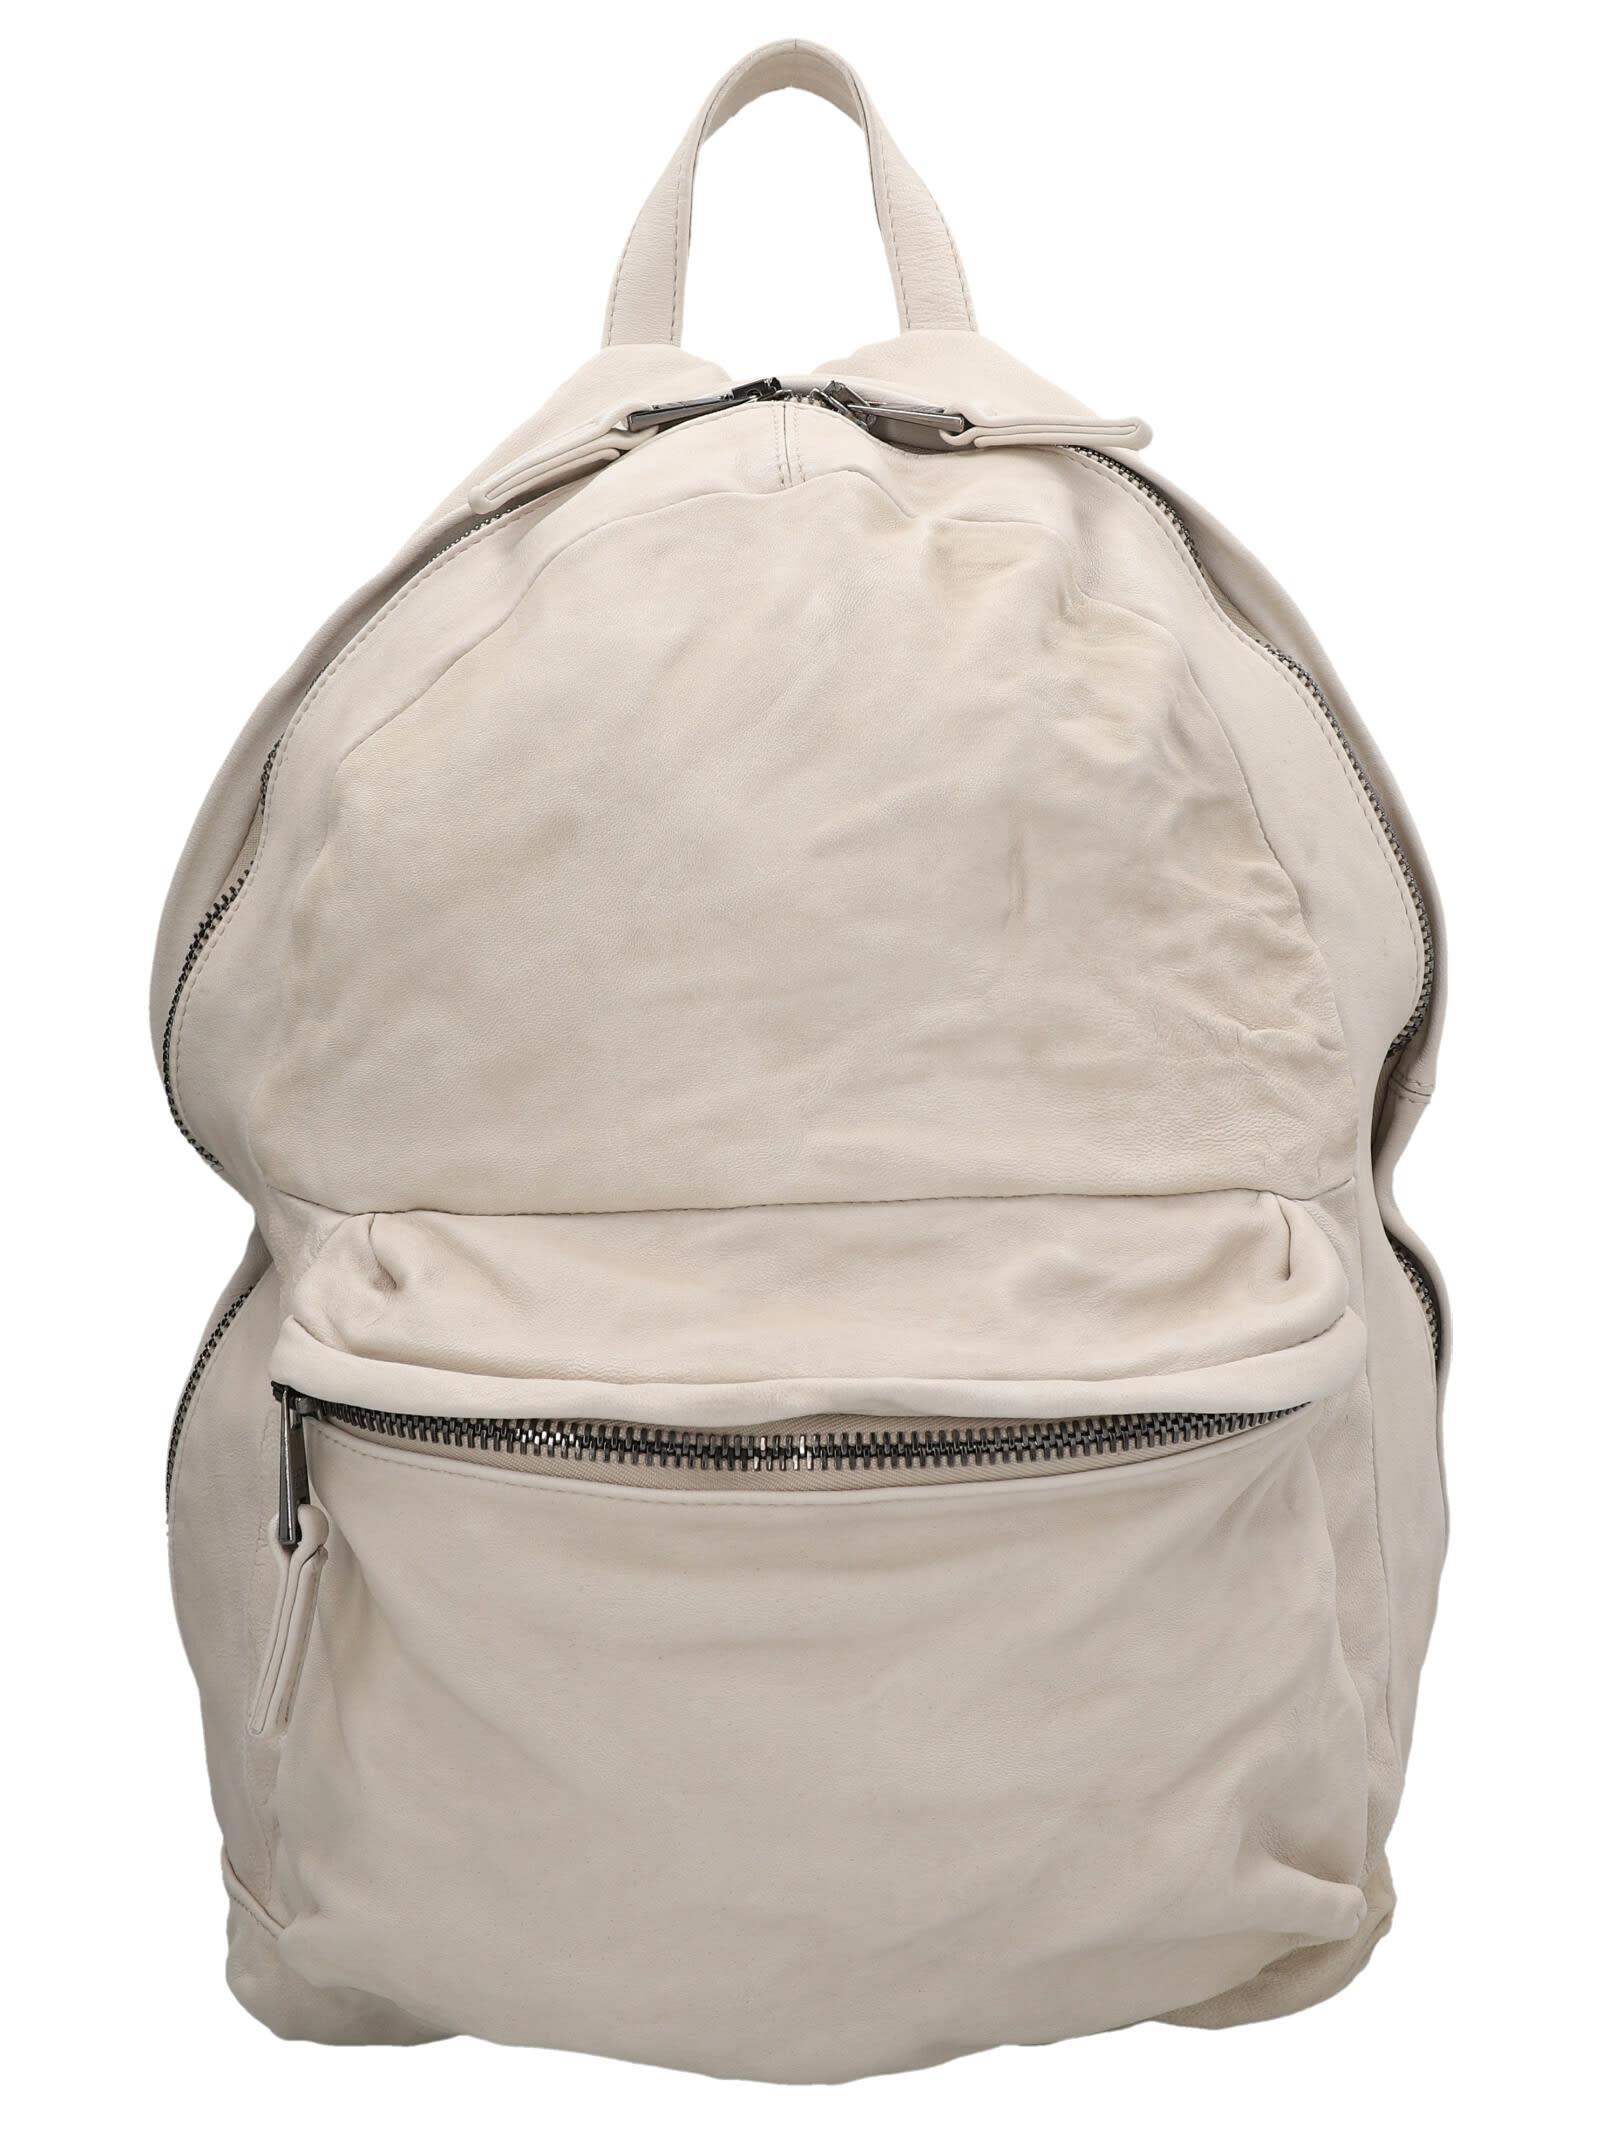 Giorgio Brato Leather Backpack in White for Men | Lyst